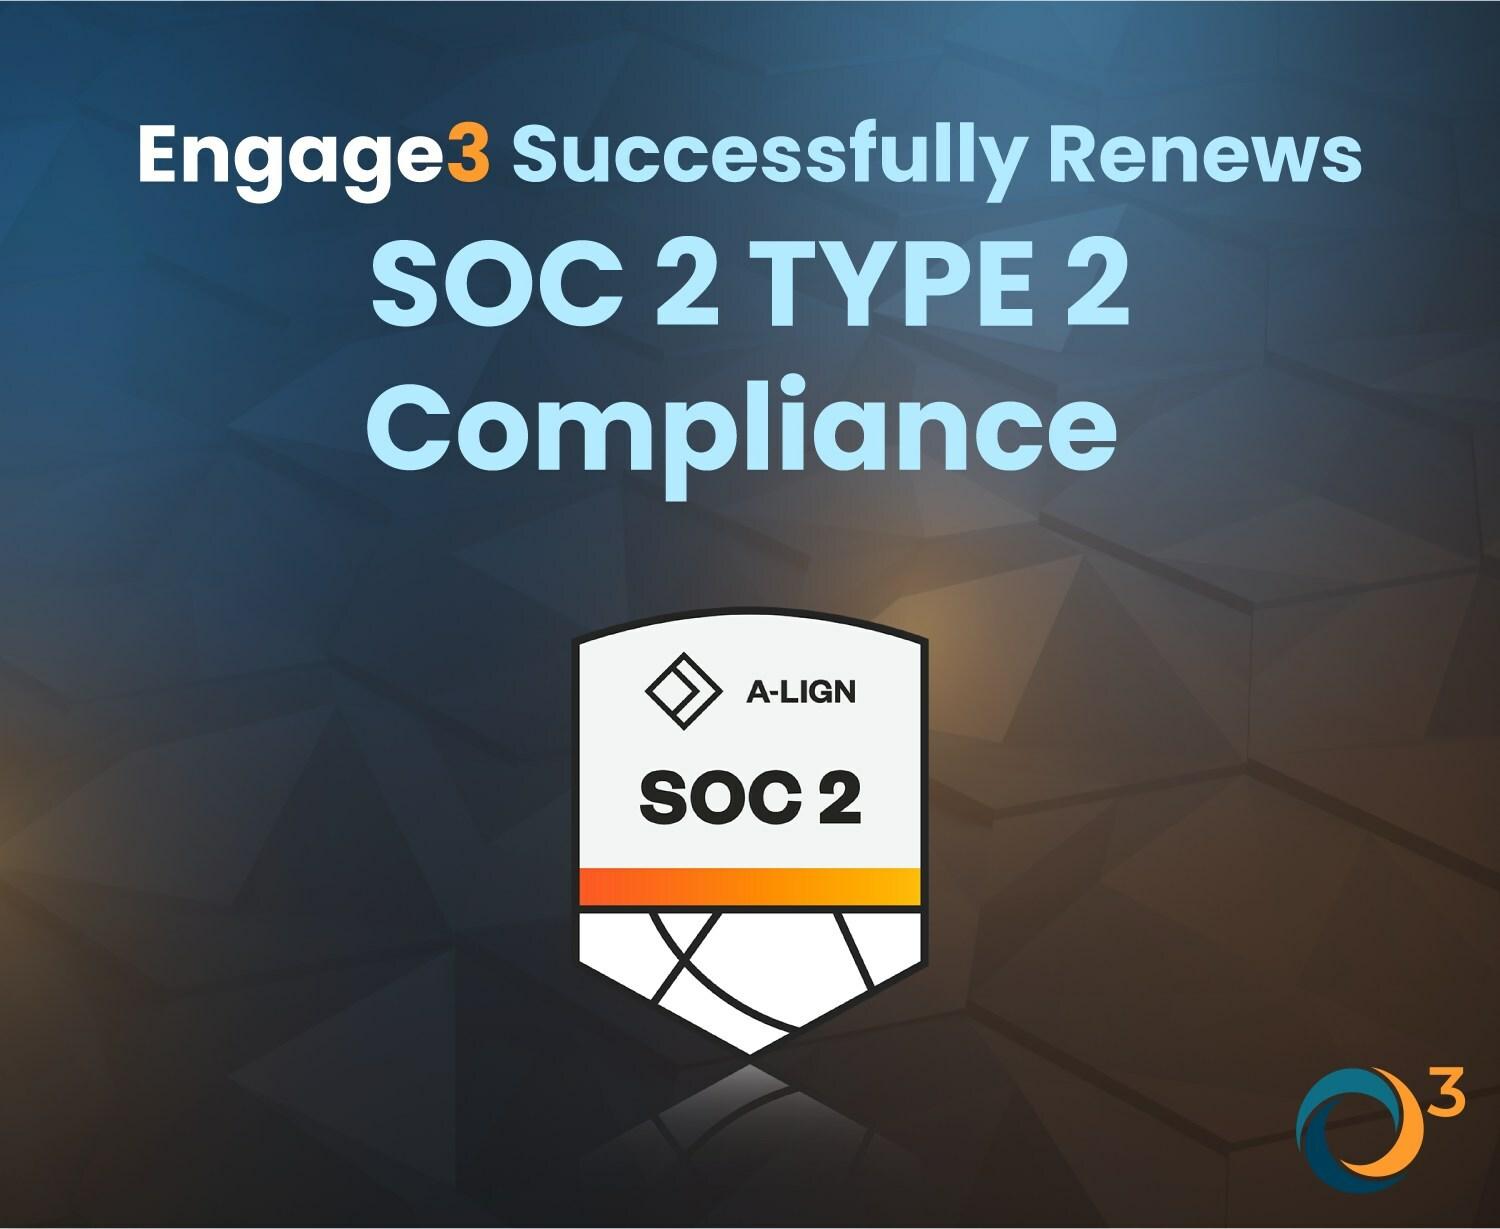 Engage3 Successfully Renews SOC 2 Type 2 Compliance for Price Image Management Suite